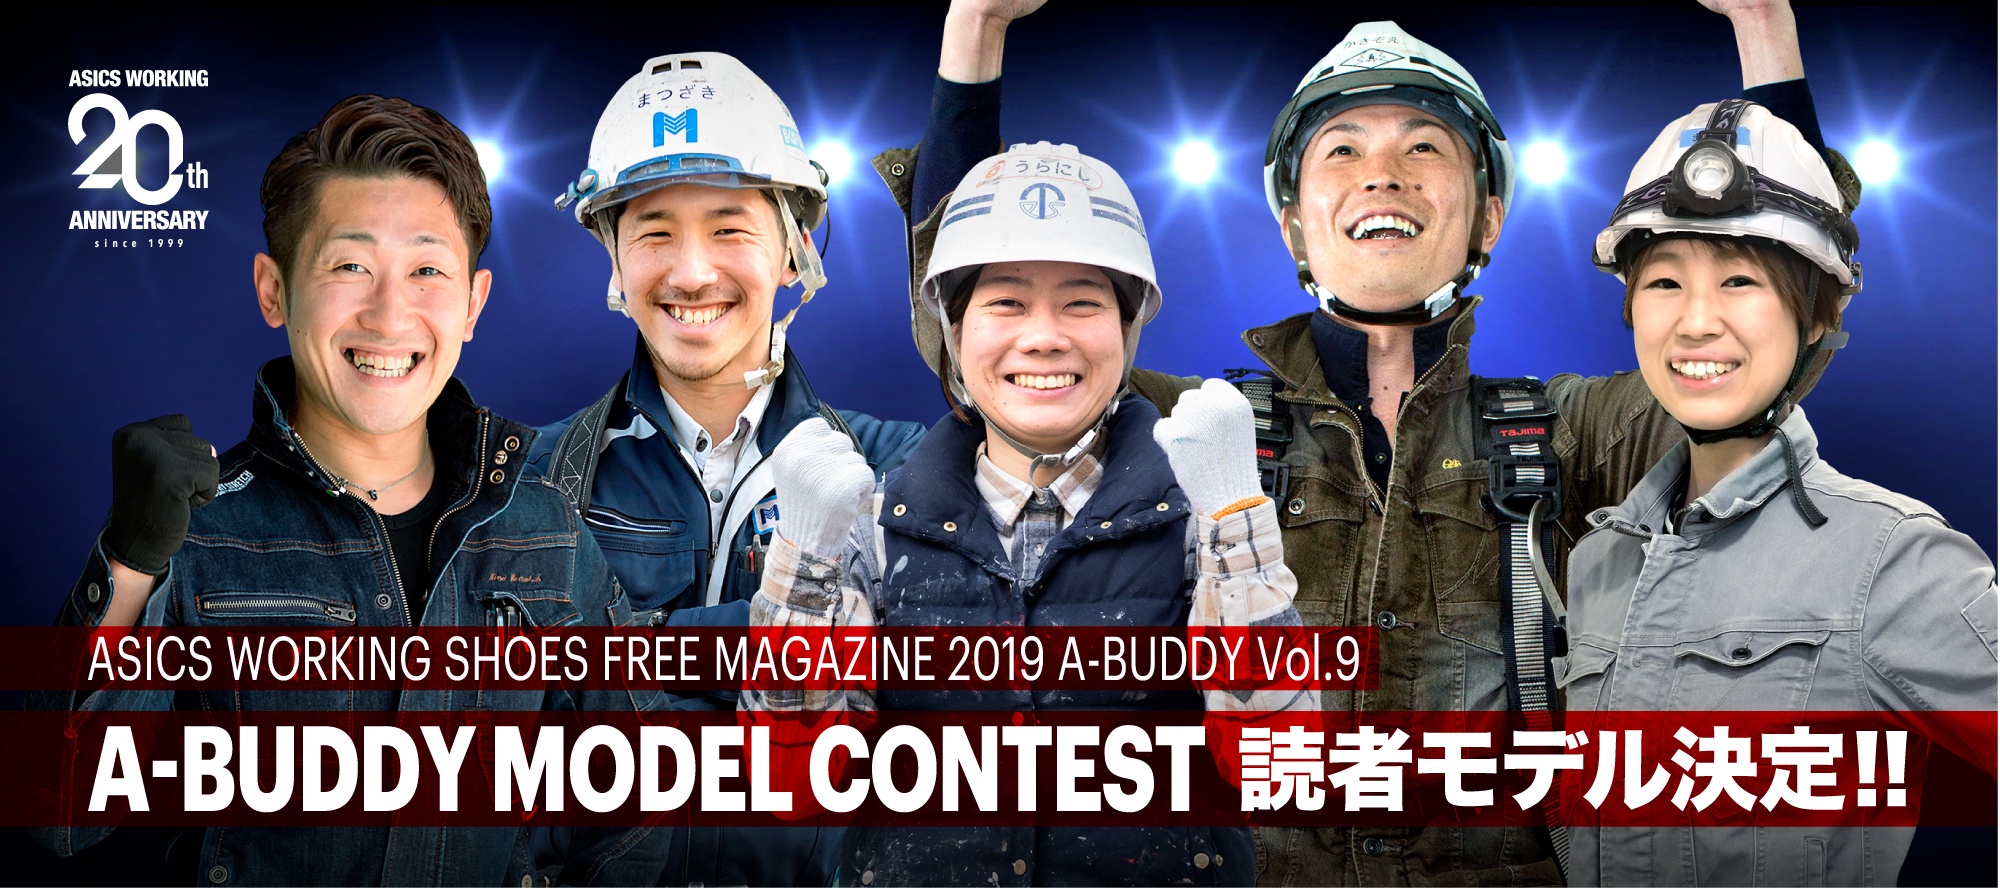 A-BUDDY MODEL CONTEST 読者モデル決定！！